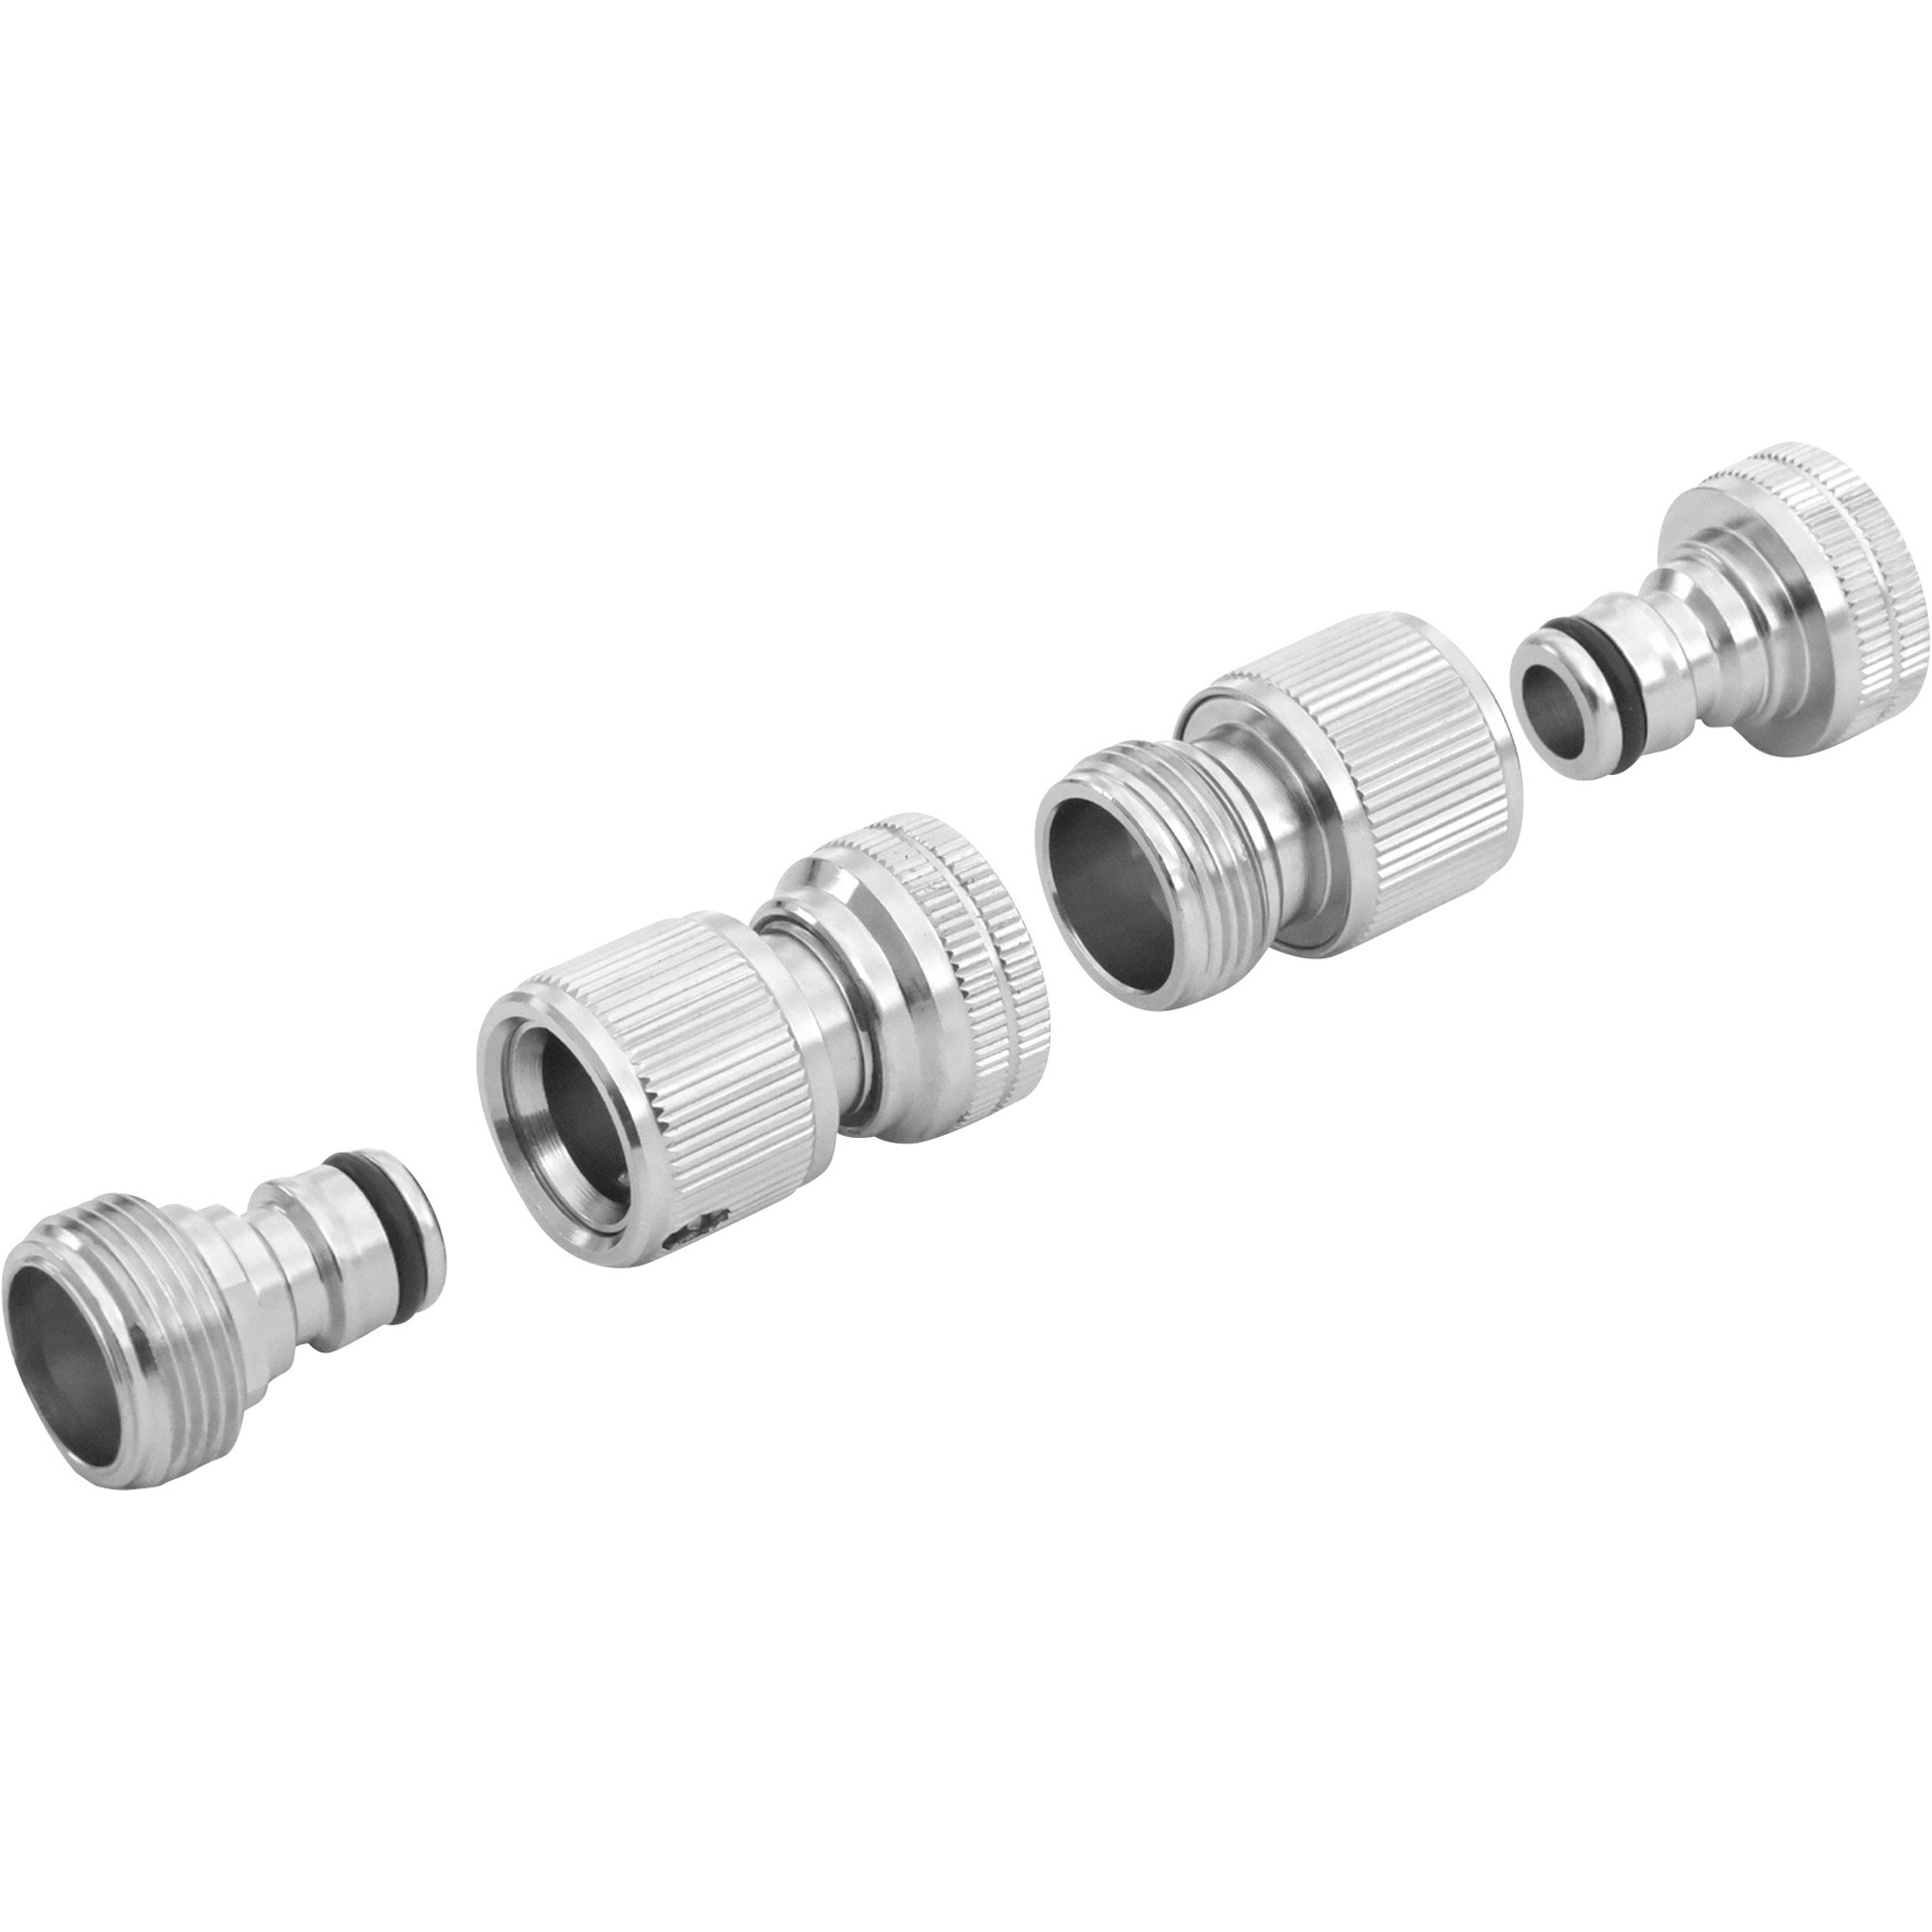 Avagard Quick Connect 4-Piece Coupler Kit, 3/4Inch GHT, 500 PSI, Brass, Model AVGQC01KIT